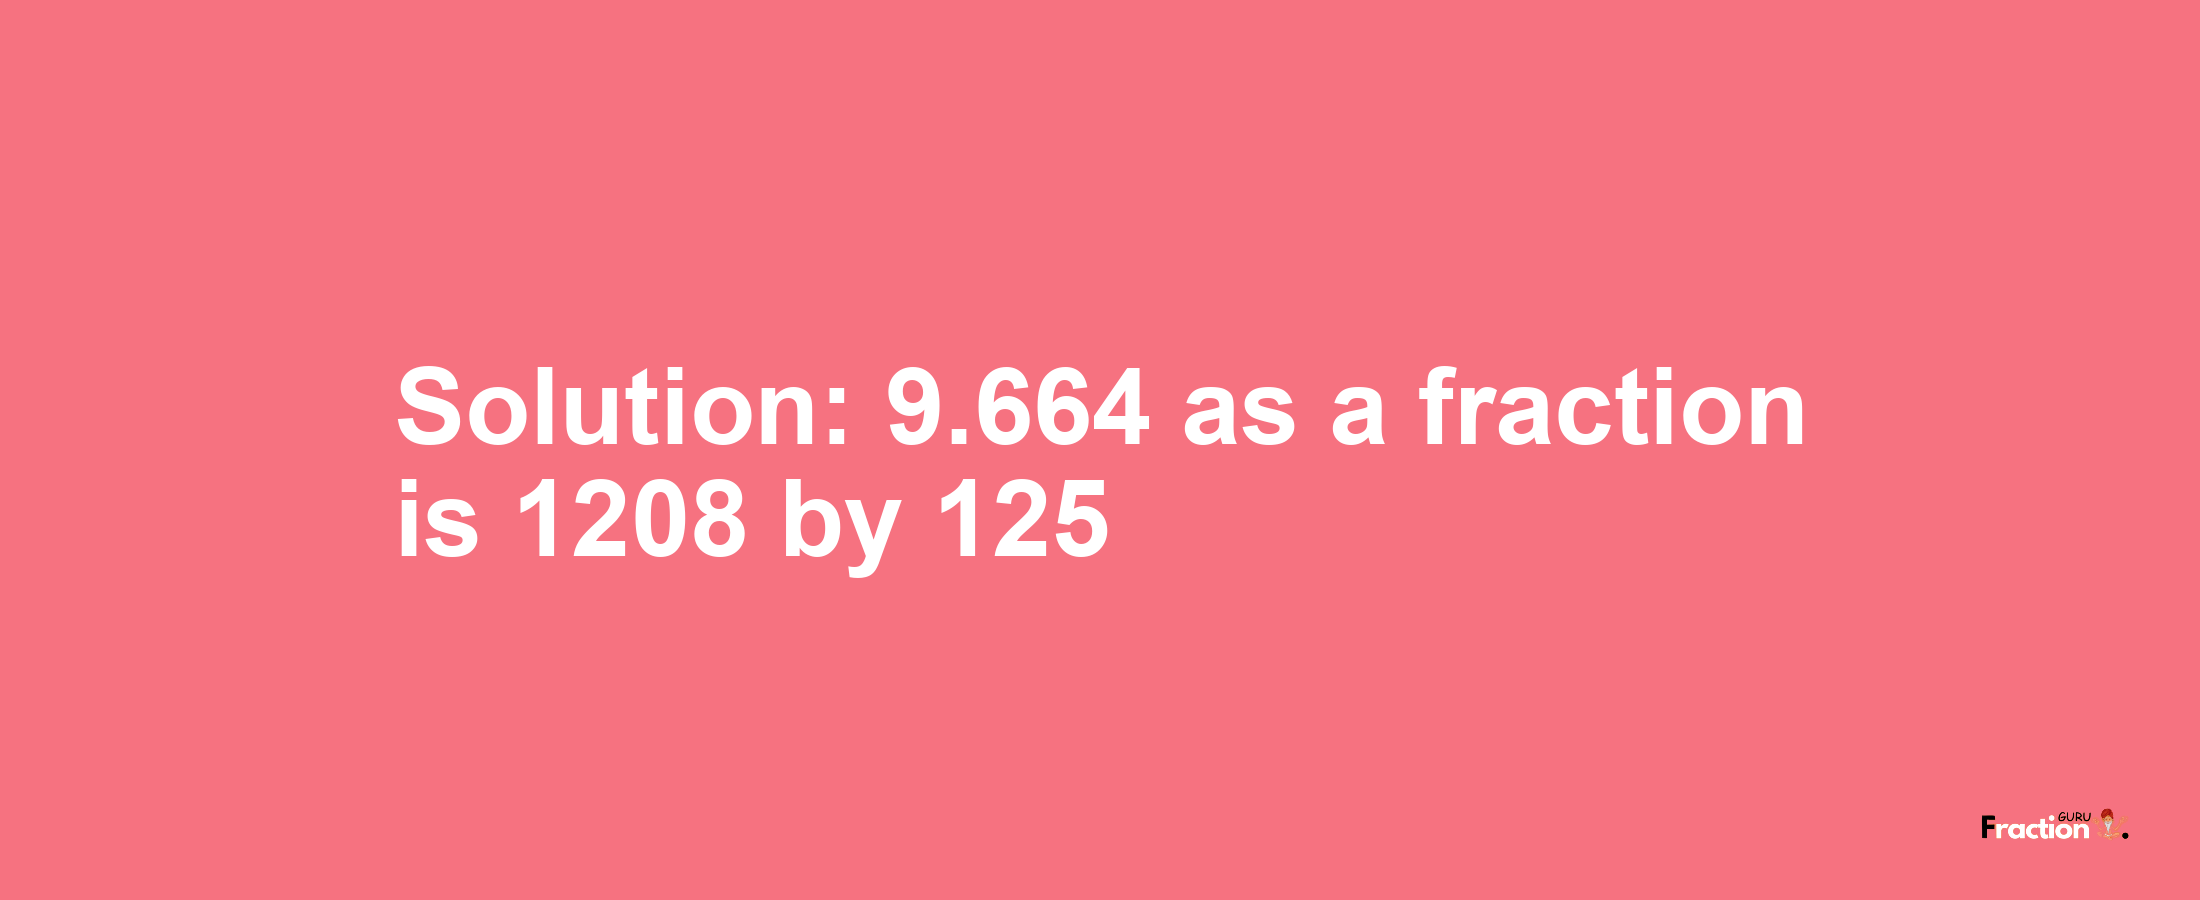 Solution:9.664 as a fraction is 1208/125